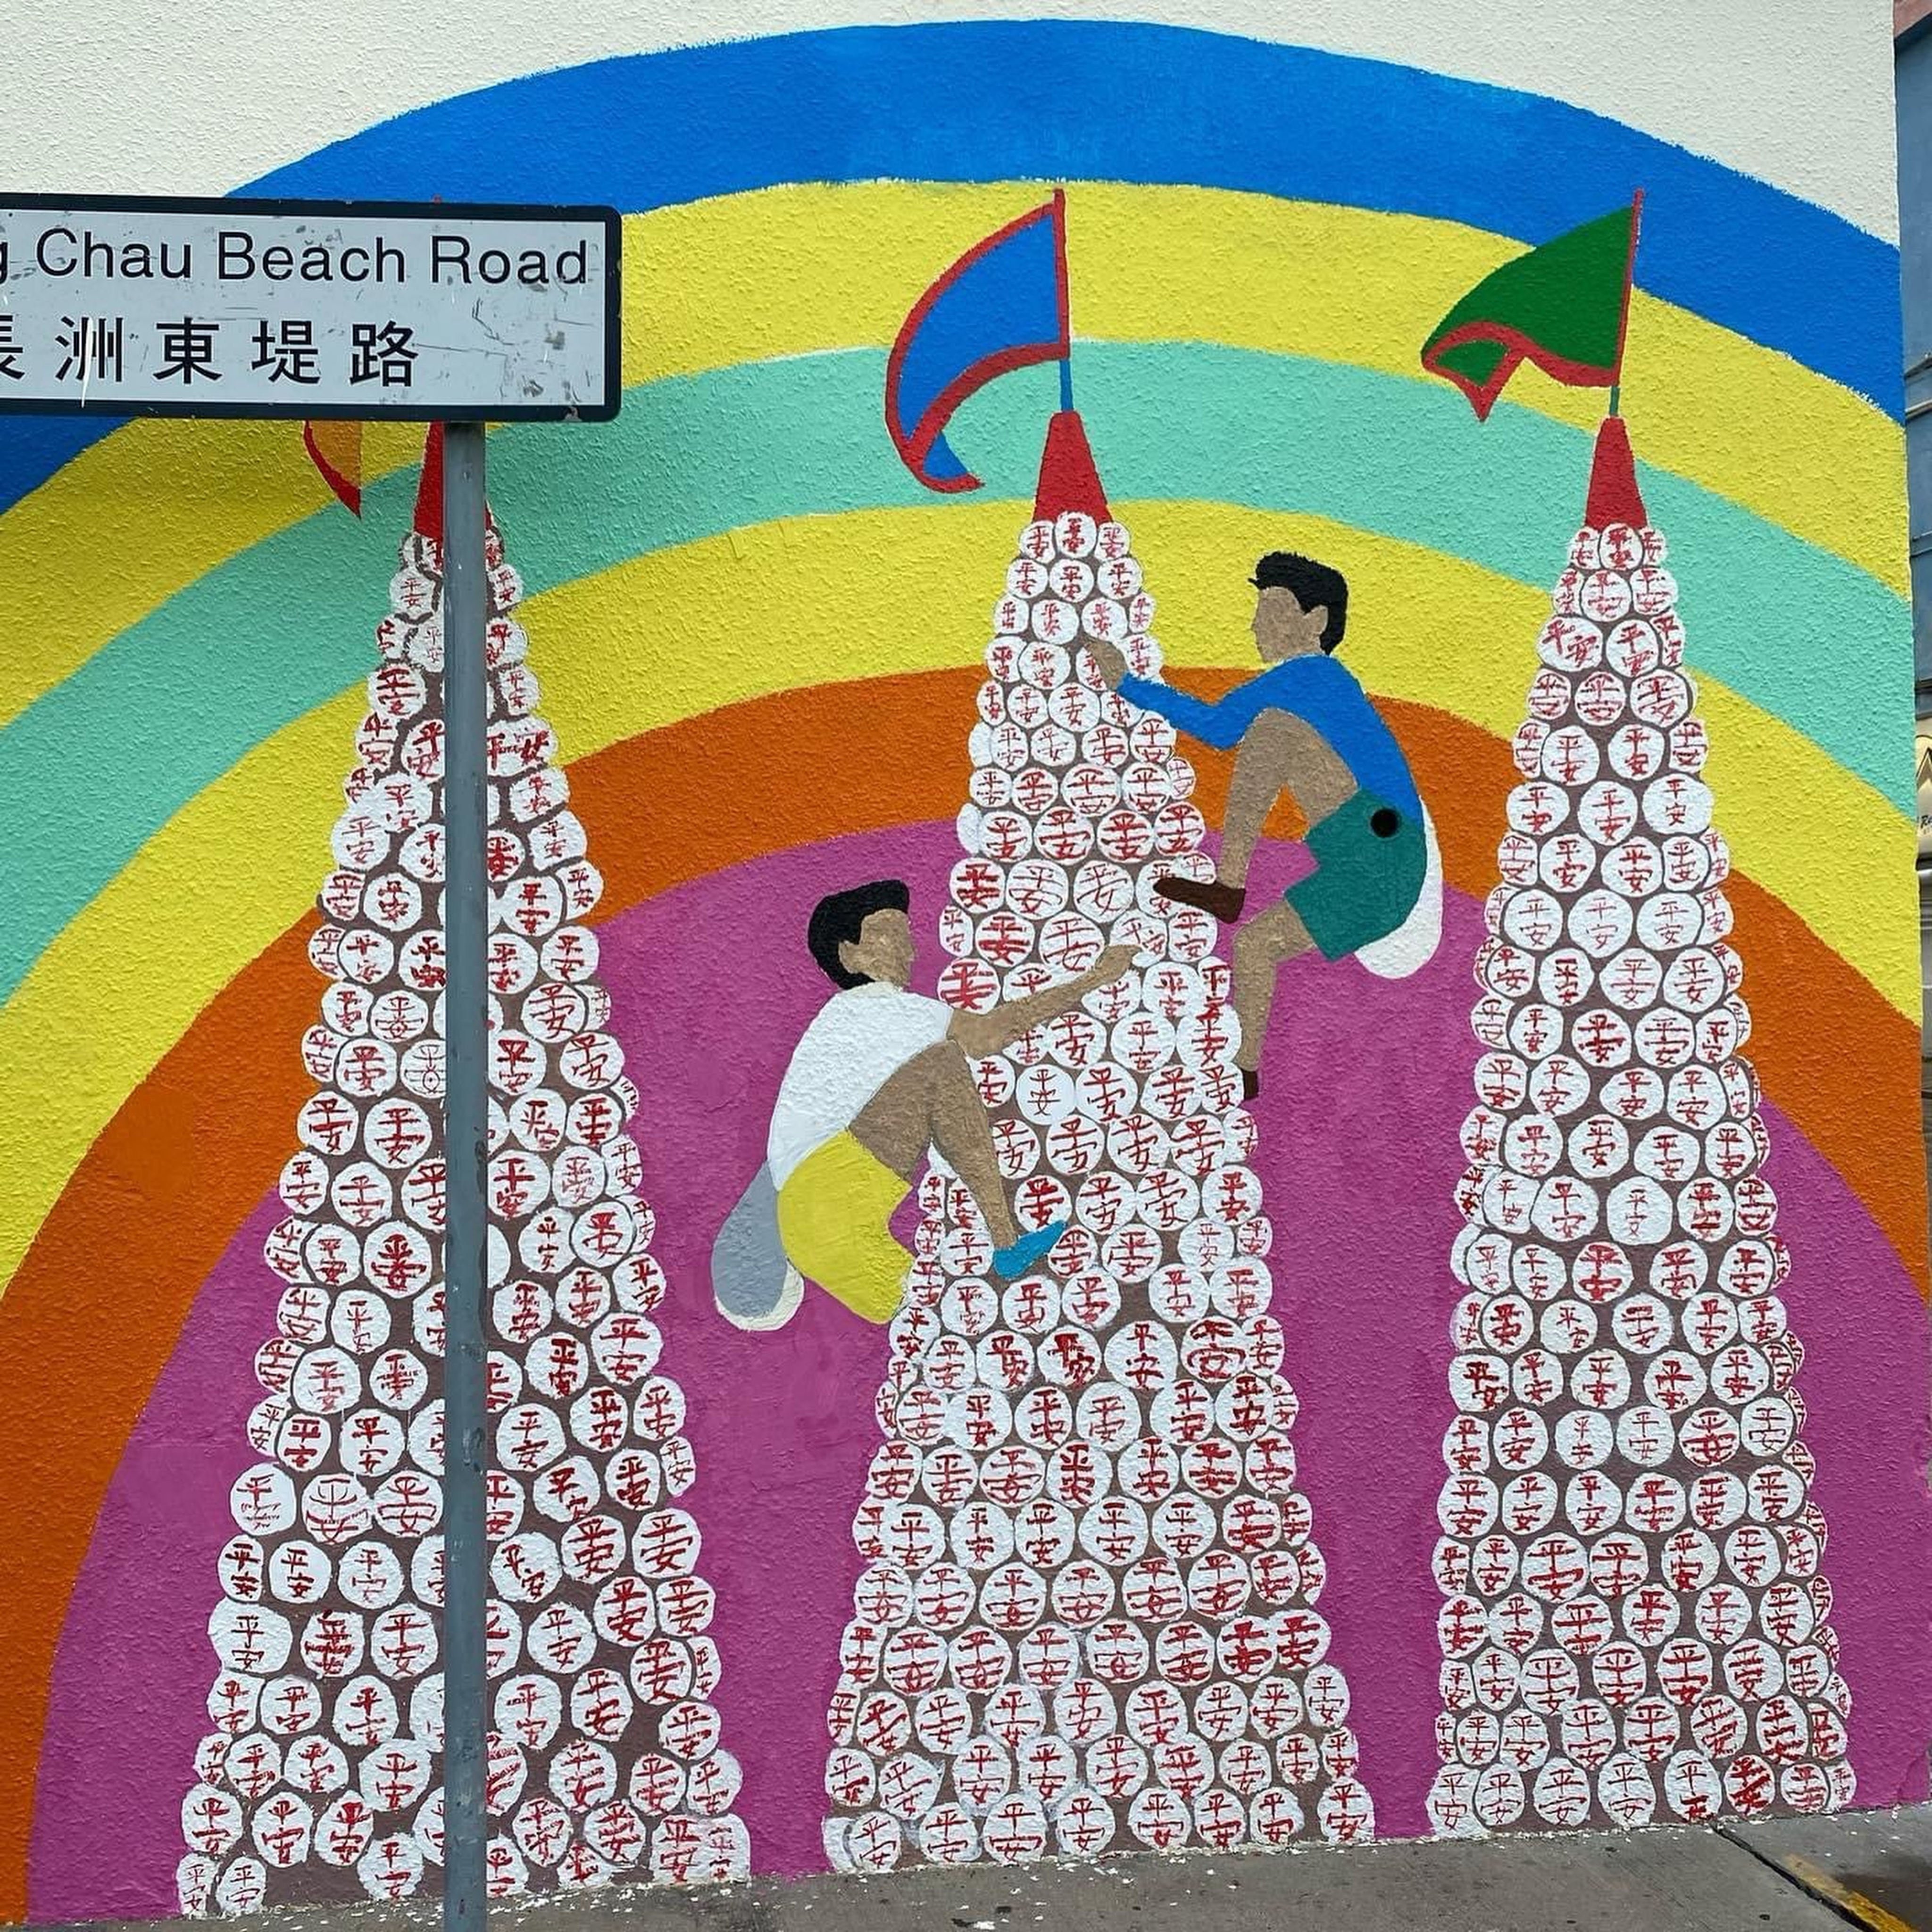 A mural on Cheung Chau island depicting the bun festival when people climb tall bamboo towers covered with buns. Photo: Handout